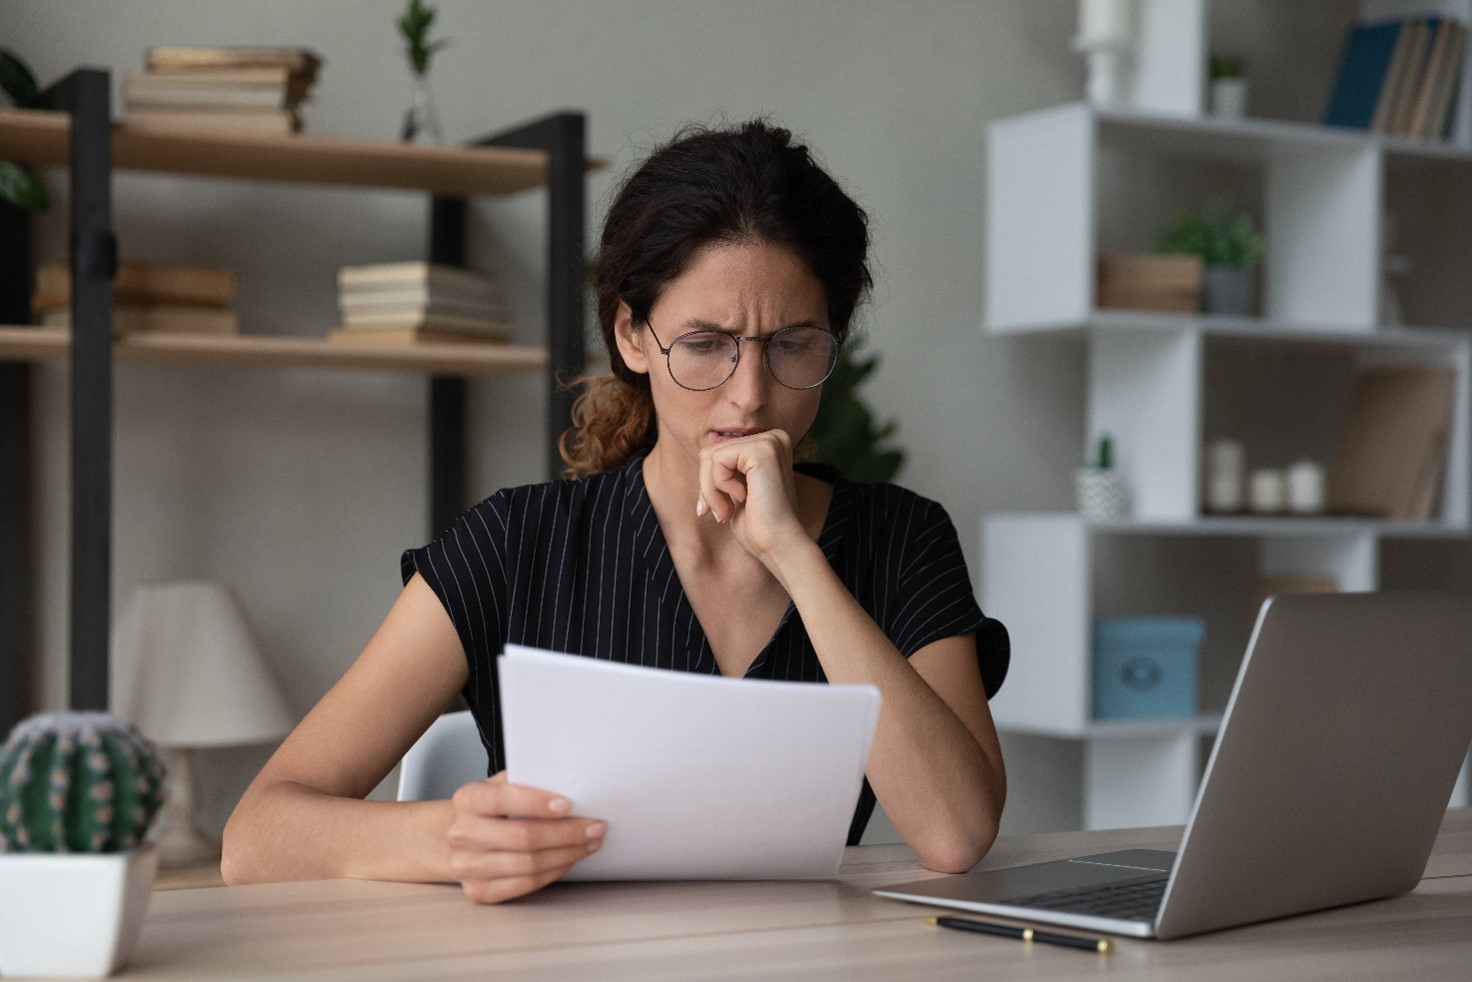 Confused and distressed looking woman reading something of a piece of paper sat at a desk in front of a laptop